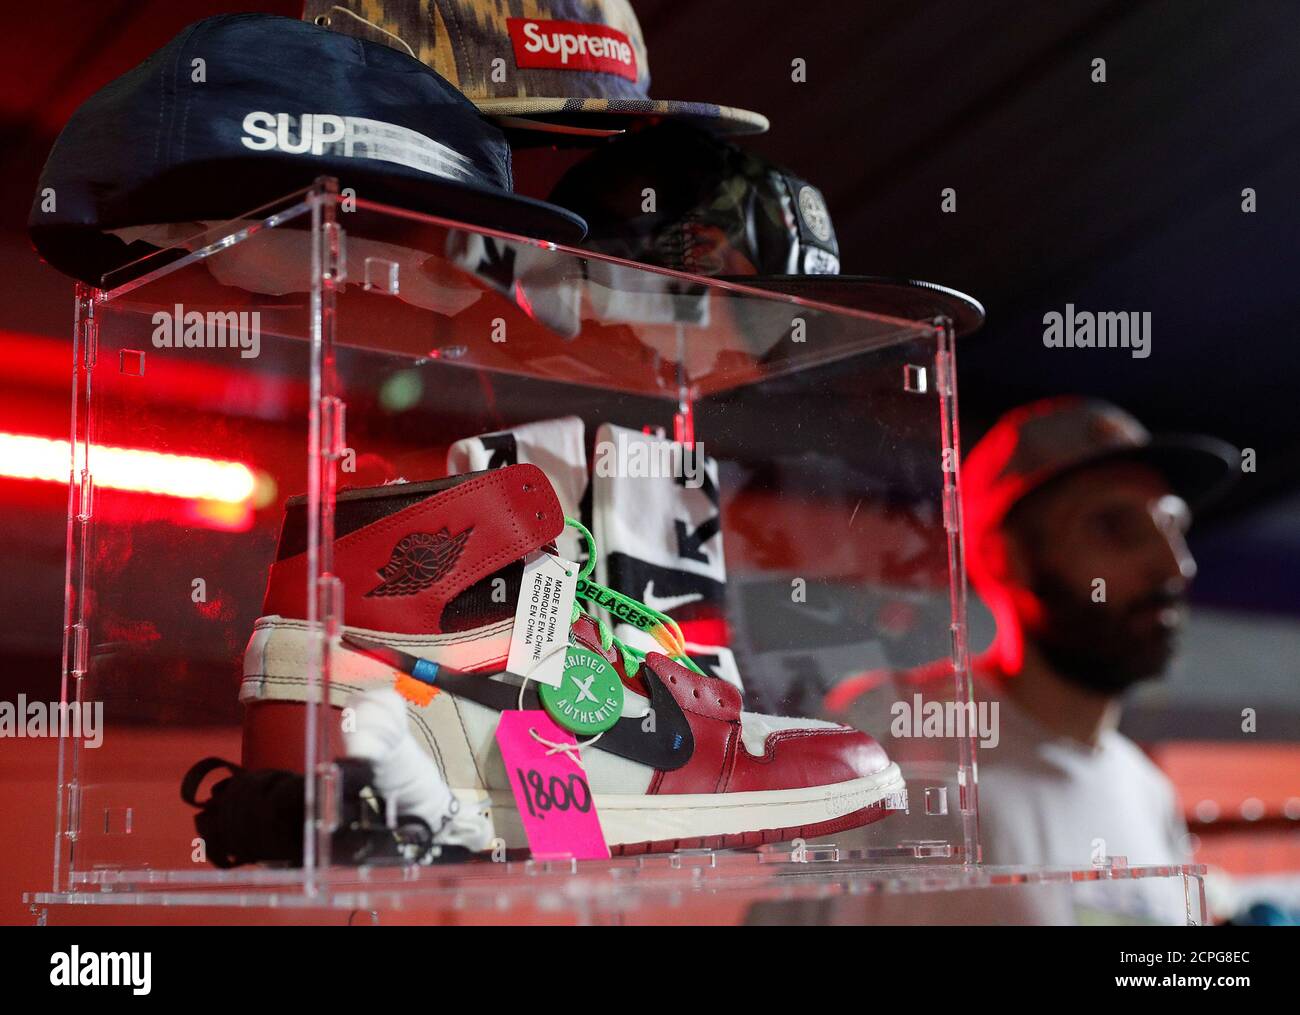 Nike Off-White Air Jordan 1 sneakers are seen at the KICKIT Sneaker e  Streetwear Market in Rome, Italy, September 23, 2018. Picture taken  September 23, 2018. REUTERS/Alessandro Bianchi Stock Photo - Alamy